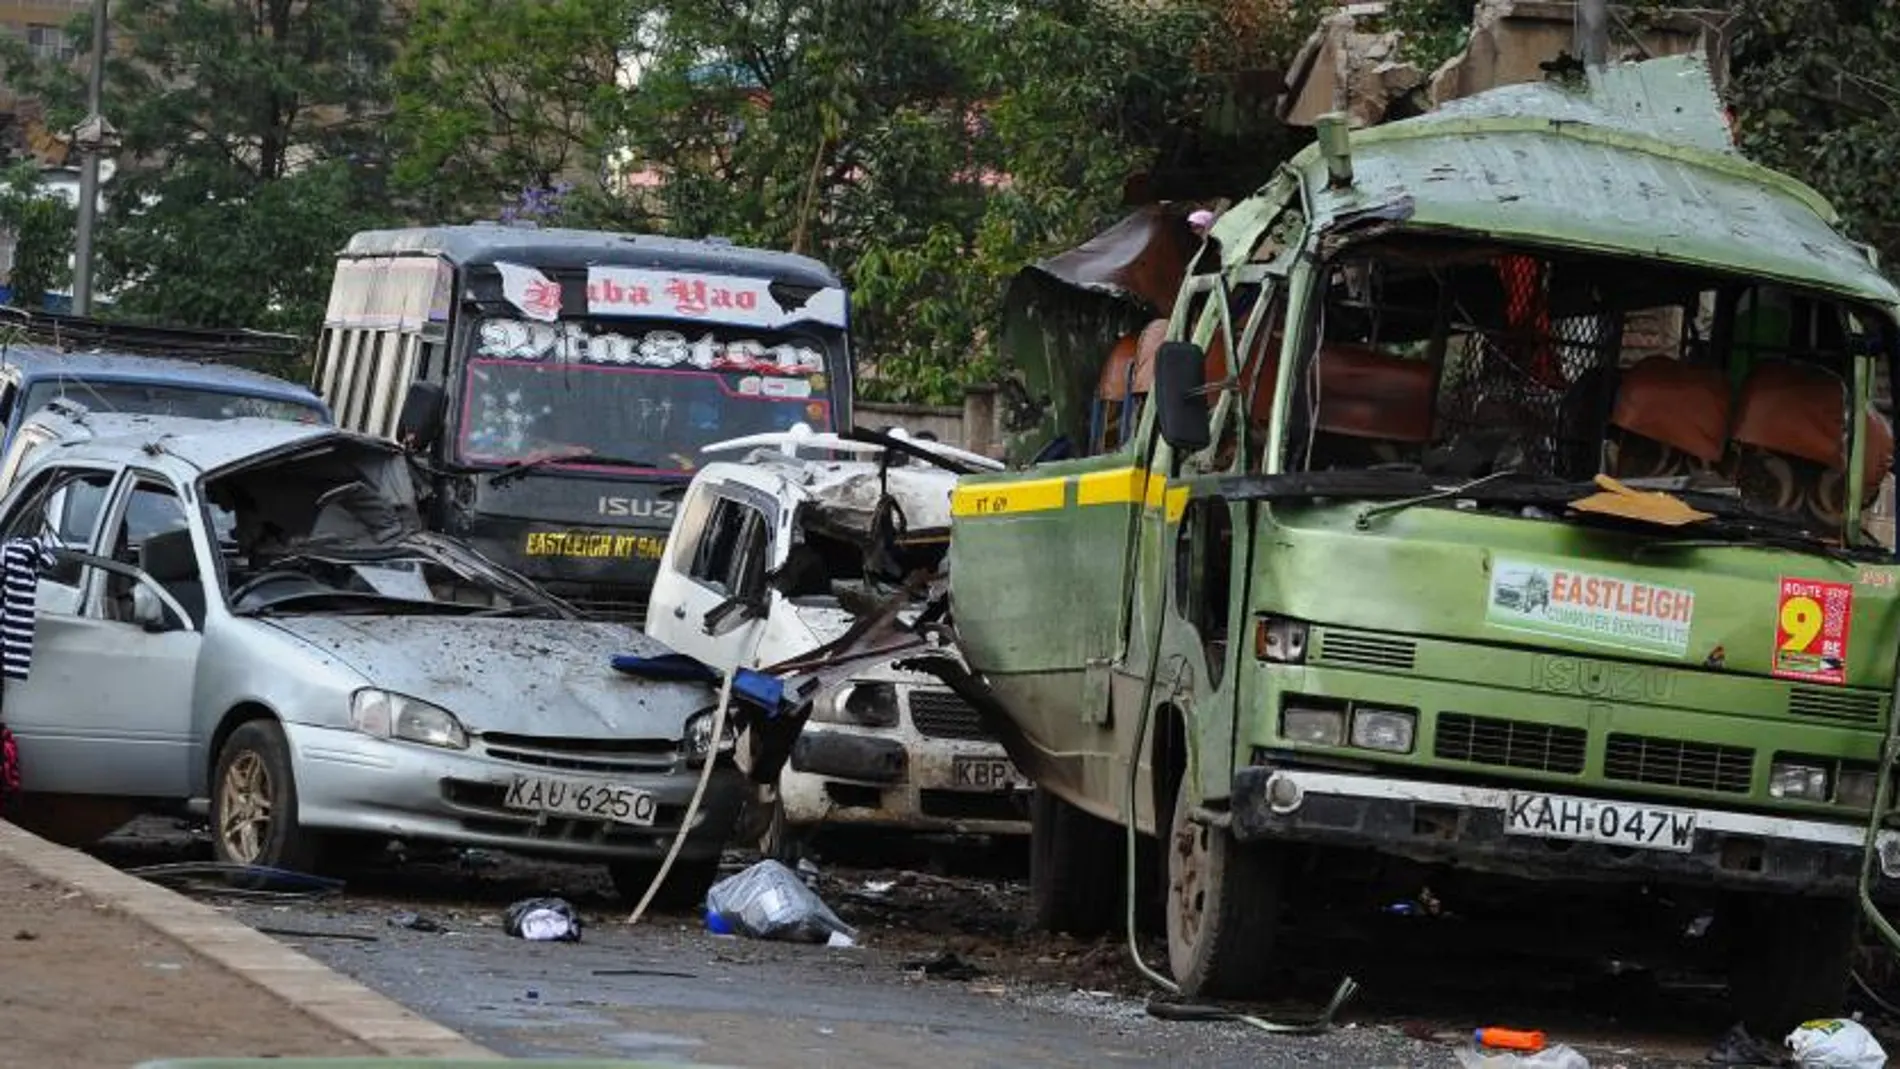 A mini bus and passenger cars pilled up after the explosion in Nairobi, Kenya, Saturday, Dec. 14, 2013. Several people are feared dead and others injured in an explosion on a minibus in Nairobi's Pangani residential estate, the Kenyan police said on Saturday. (AP Photo) .